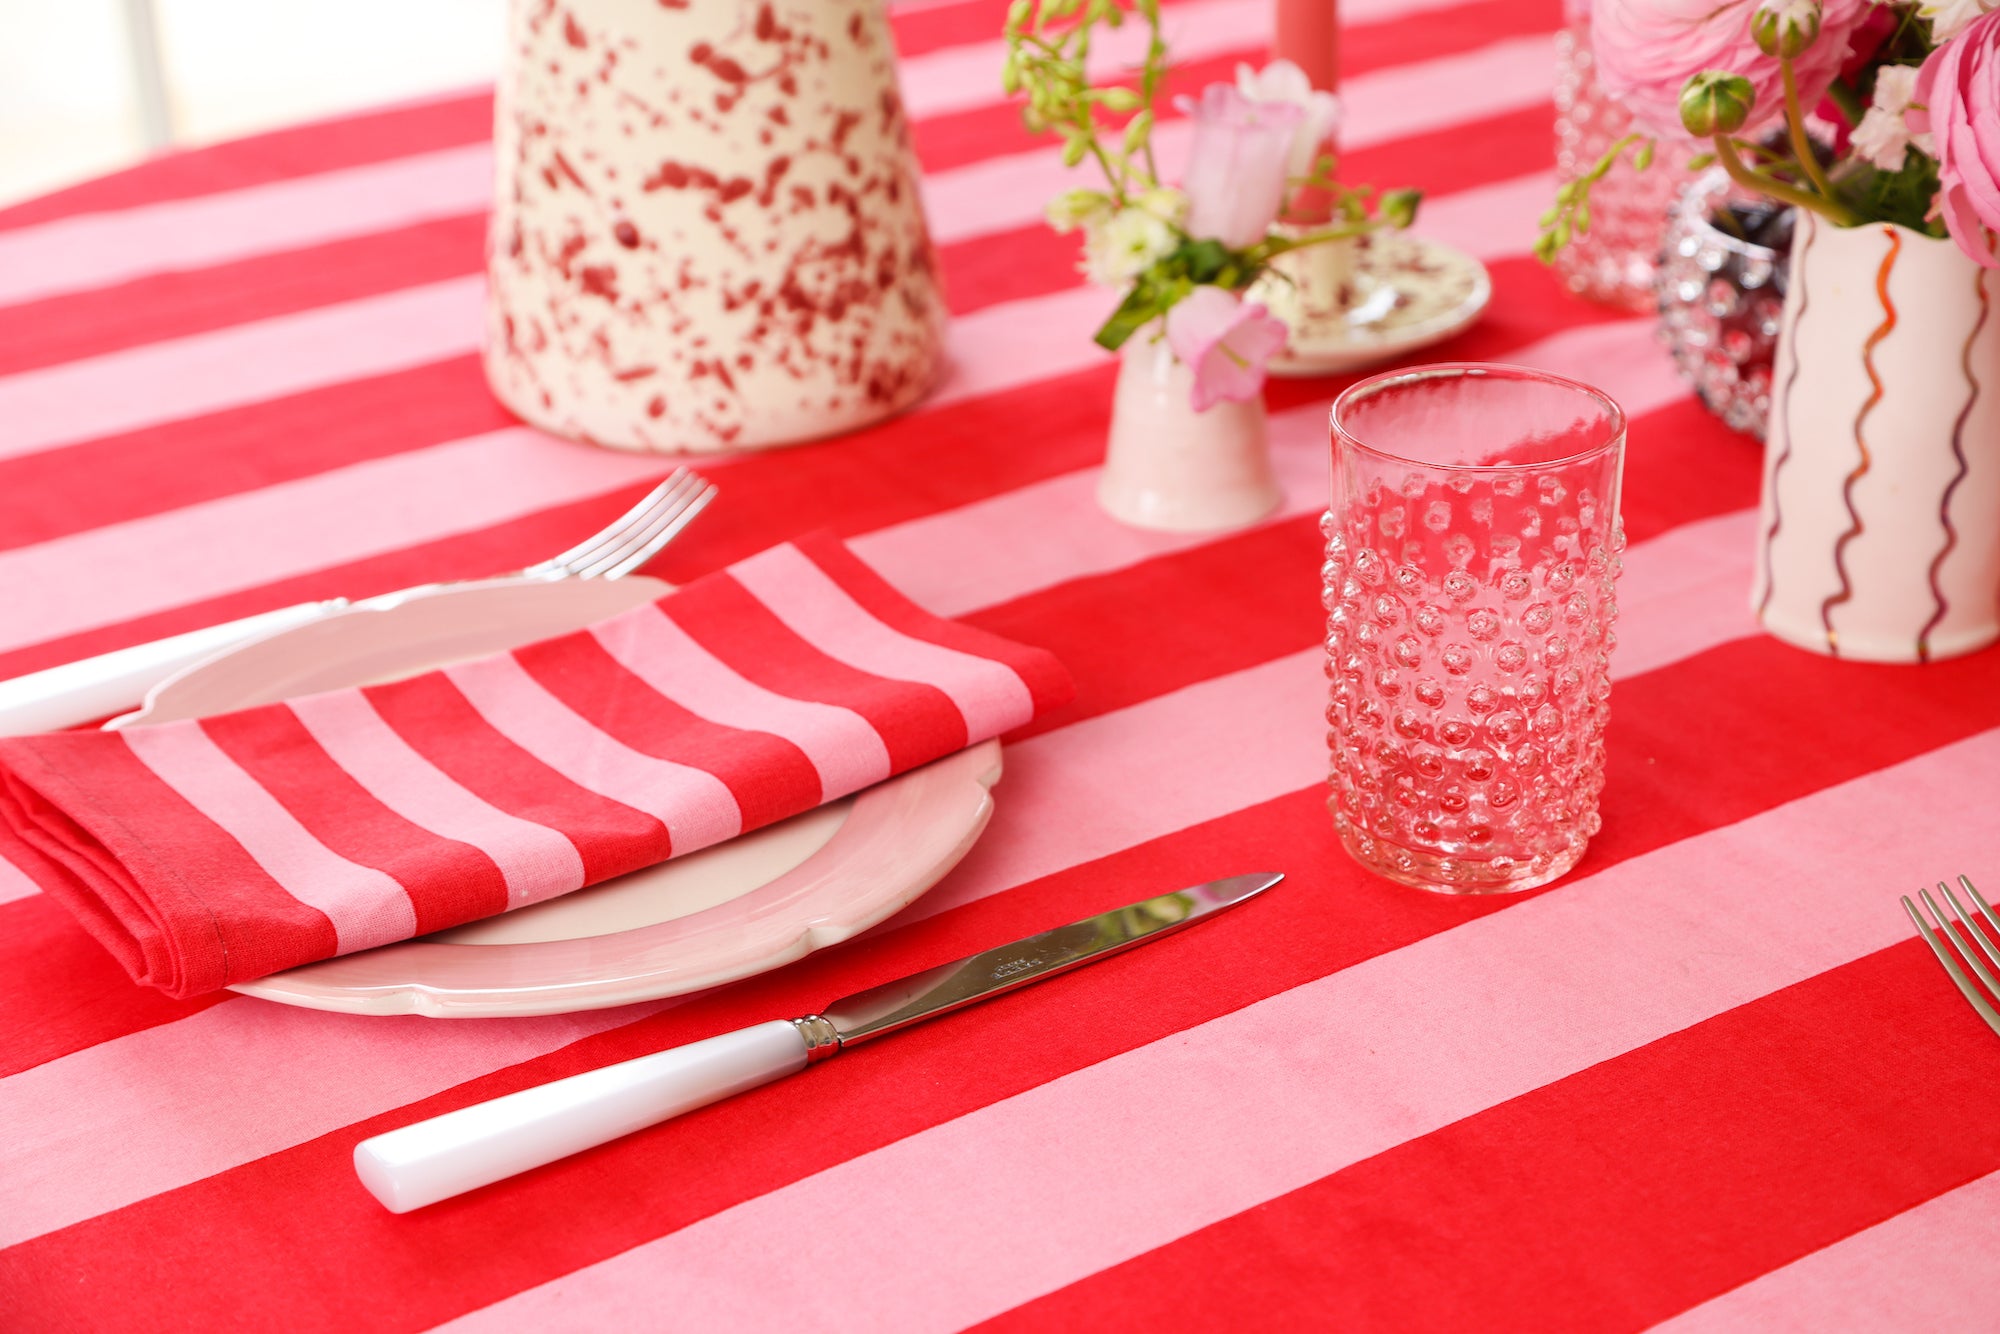 Pink & red table cloth with matching napkin